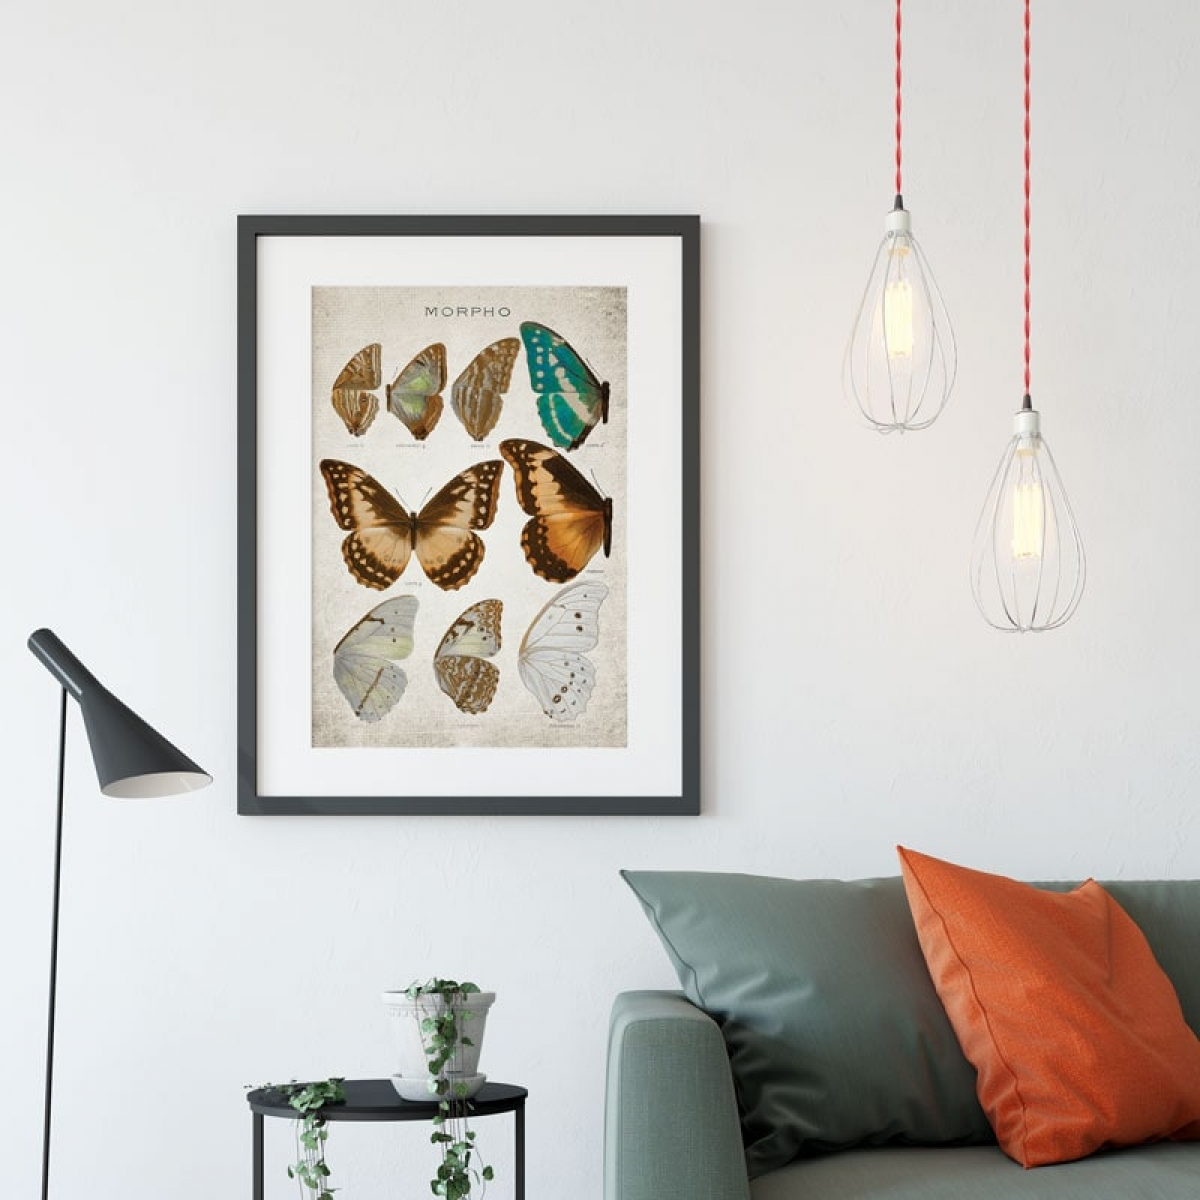 Vintage Entomology Giclee Print (Morpho Collection 1 Plate From 1867)